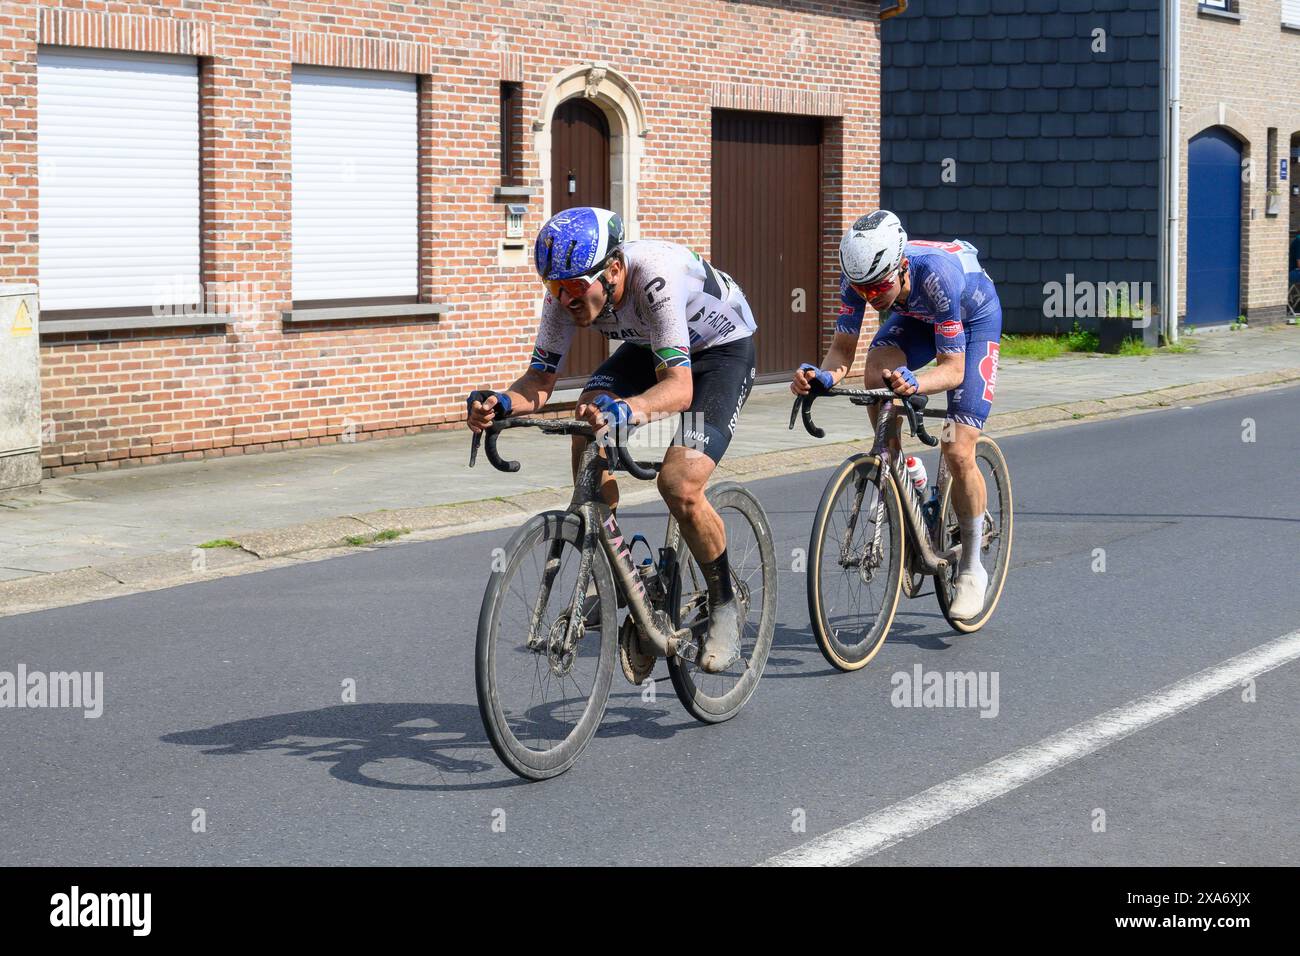 Two cyclists ride past a brick building on a city street Stock Photo